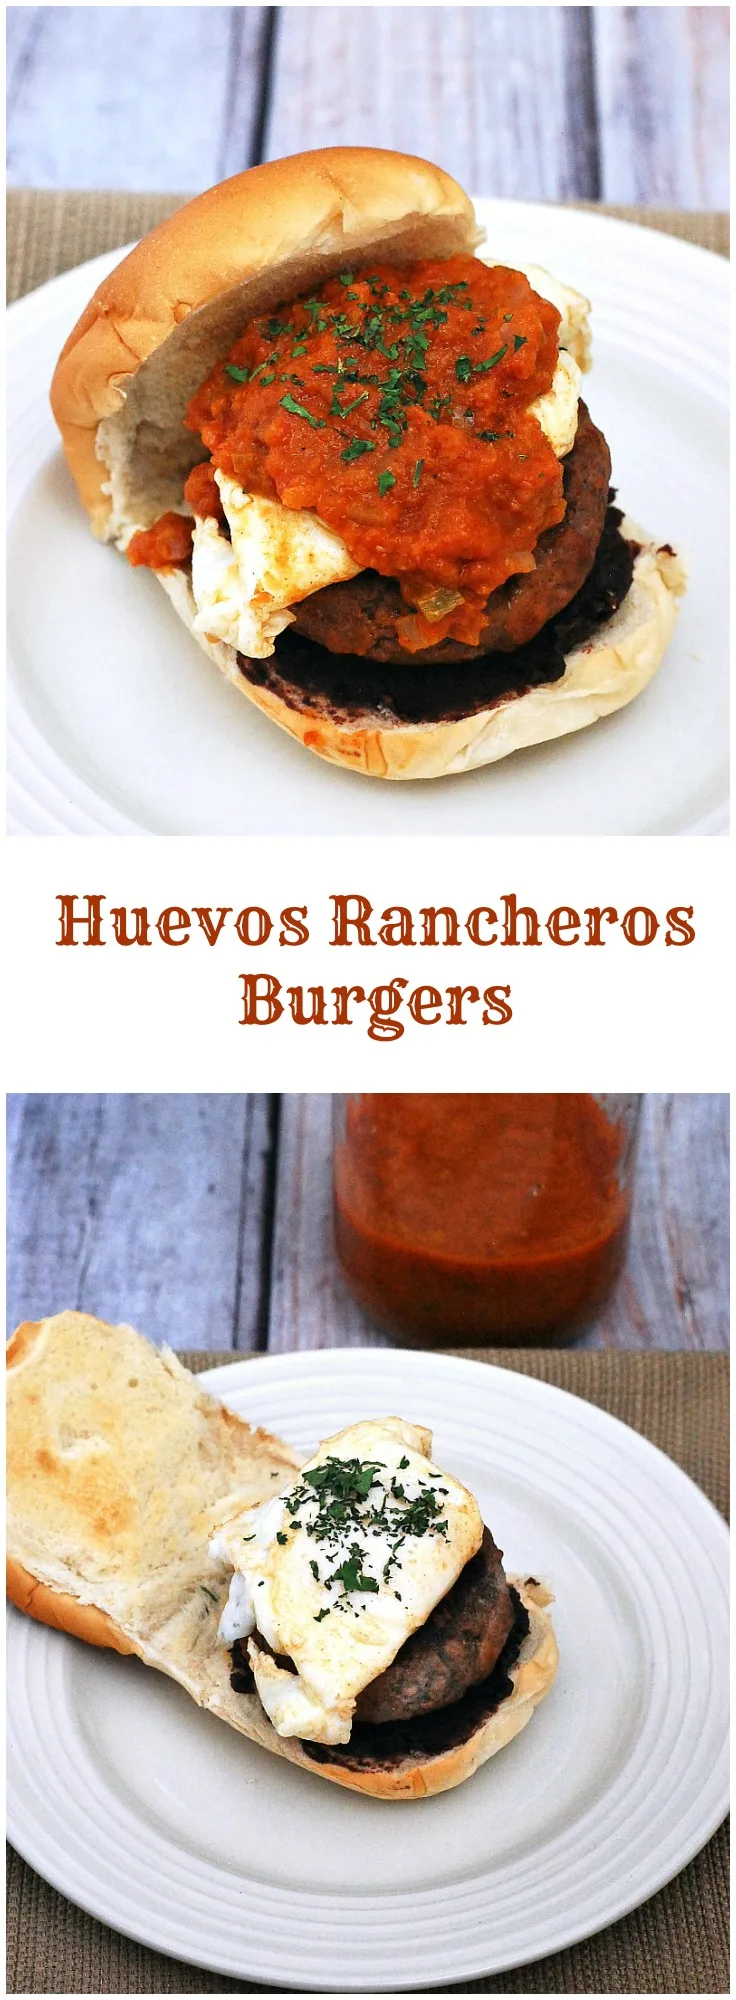 Add a kick to your brunch with huevos rancheros burgers! Spicy chorizo and beef burgers are topped with a poached egg and classic huevos rancheros chili-tomato sauce. #BrunchWeek theredheadbaker.com